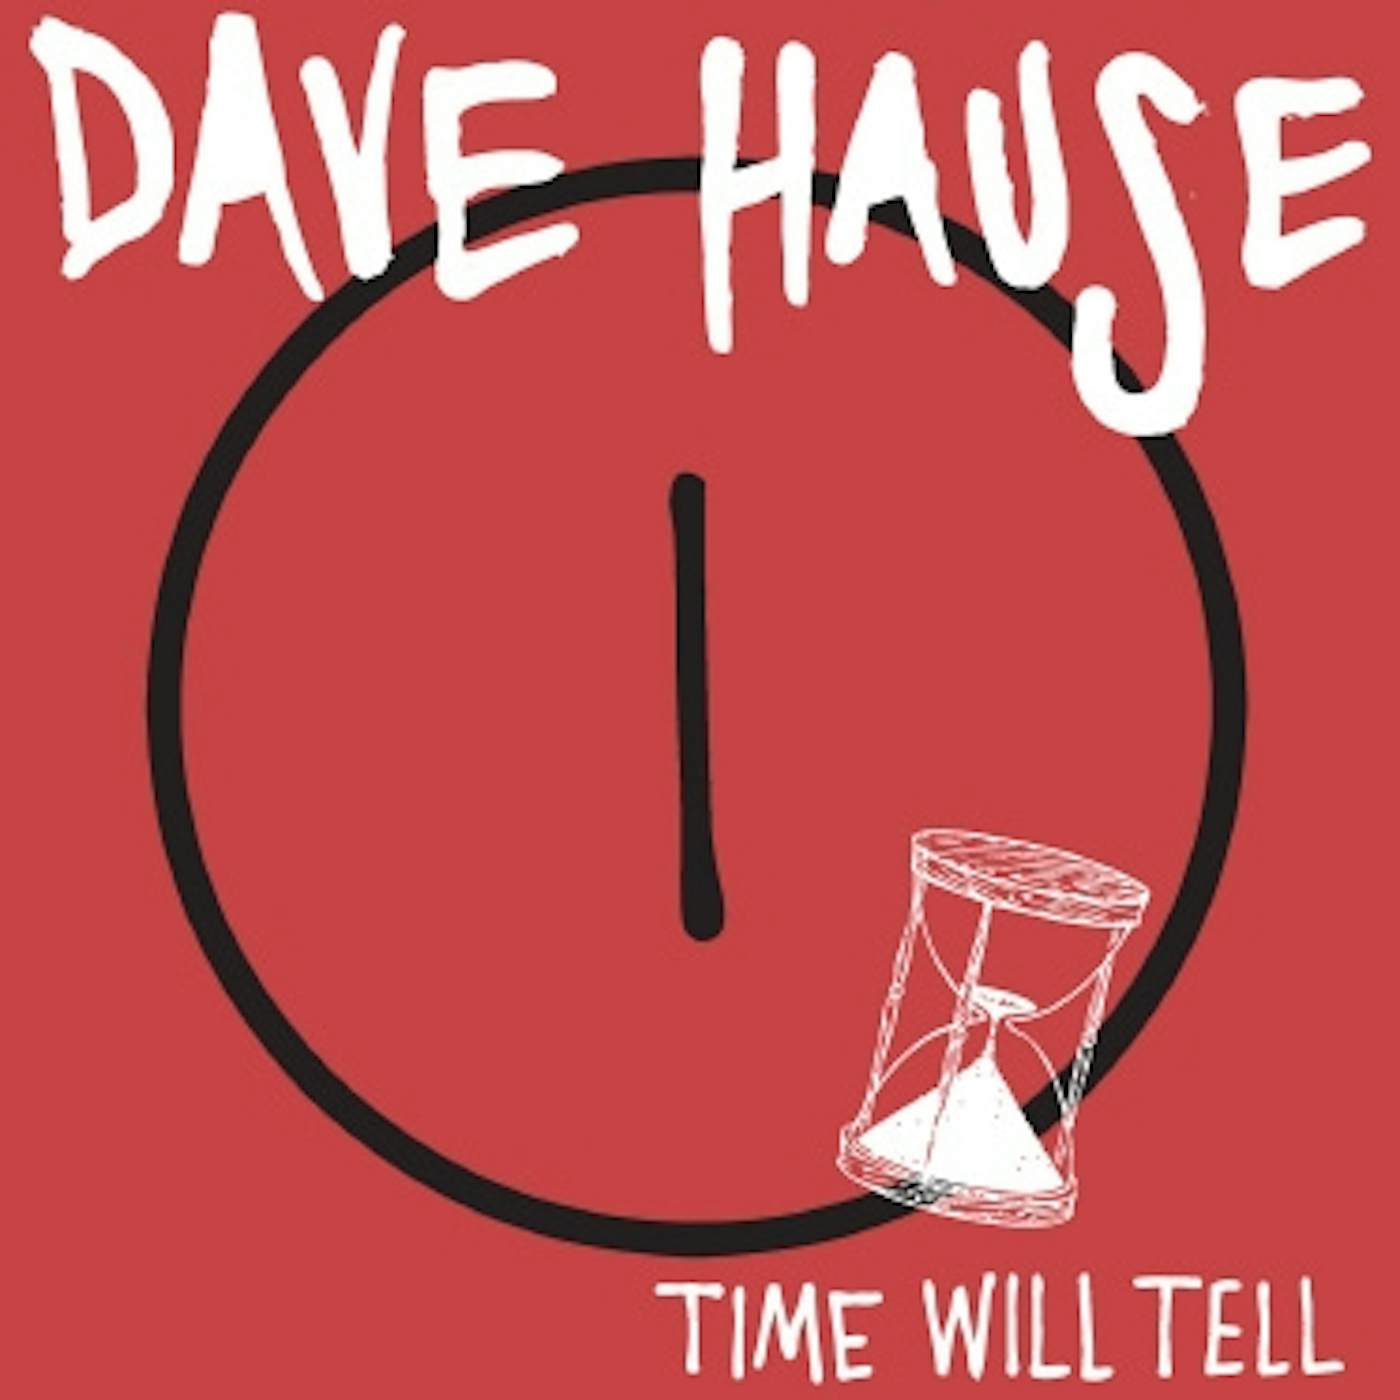 Dave Hause Time Will Tell Vinyl Record